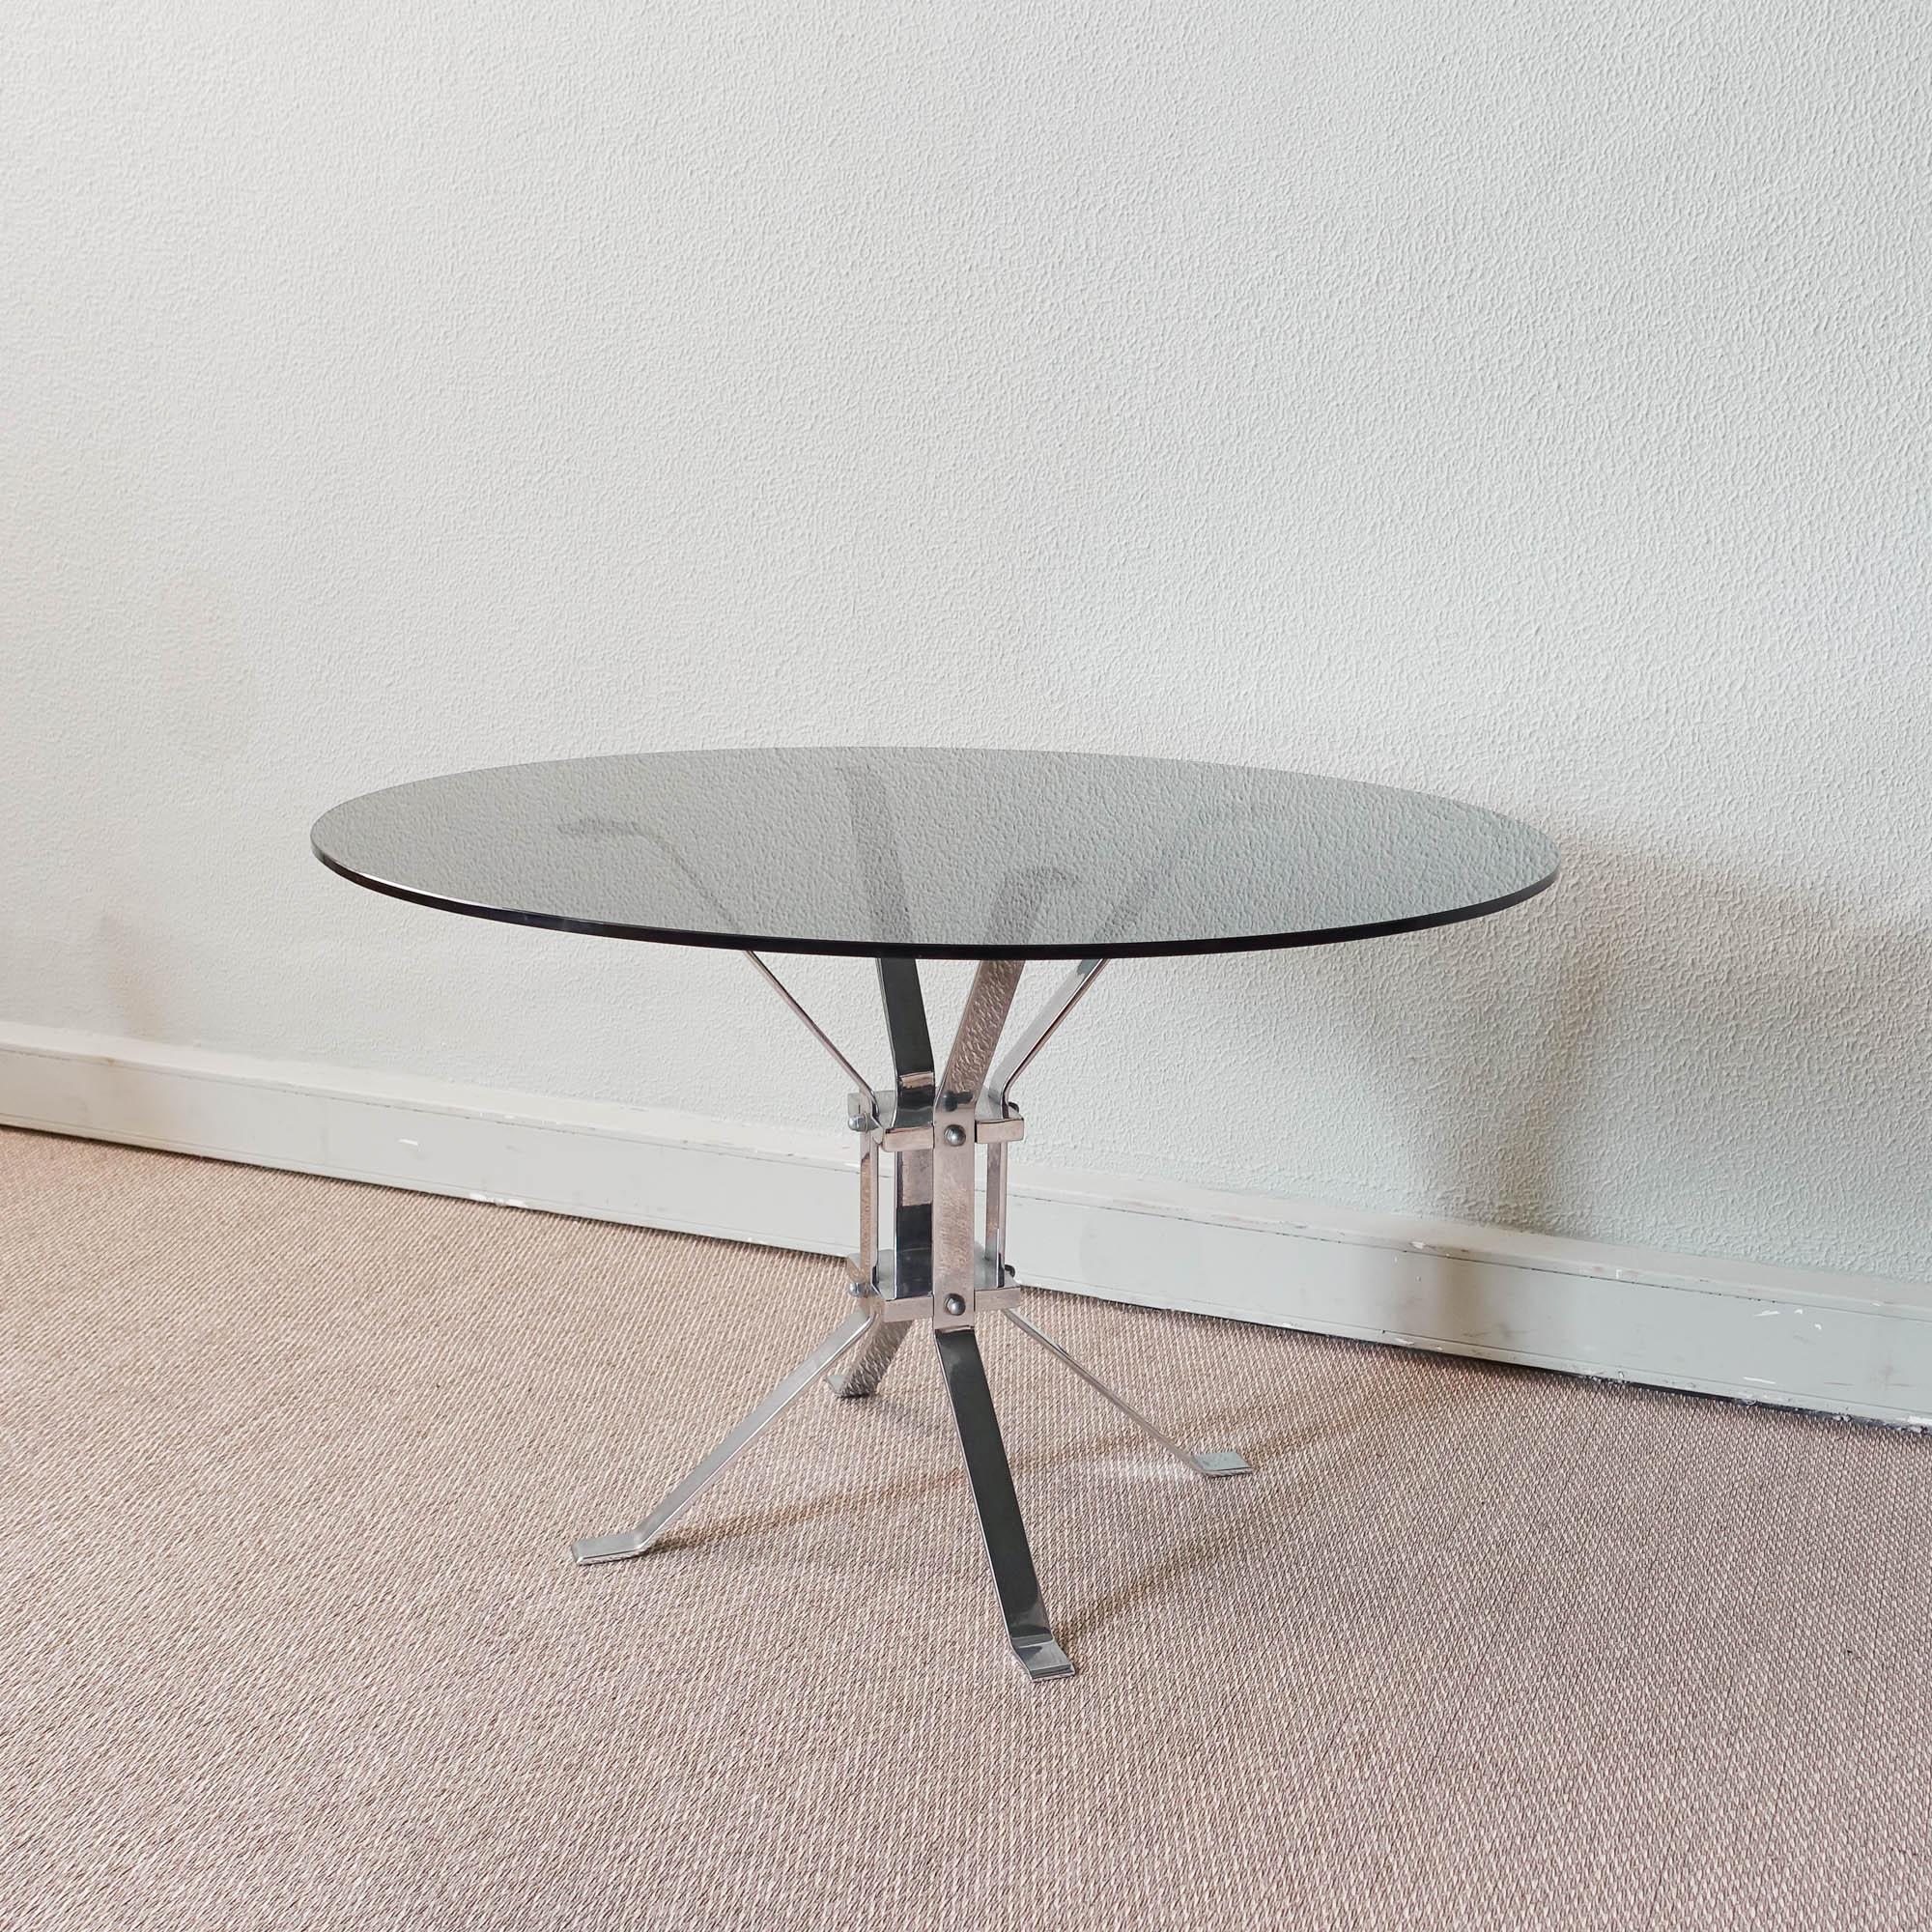 This coffee table was designed and produced in Italy during 1970s. The structure as a central foot and is made of chromed steel legs with the top in smoked glass. The glass top is original, and one of the rubbers, that protect the glass from the